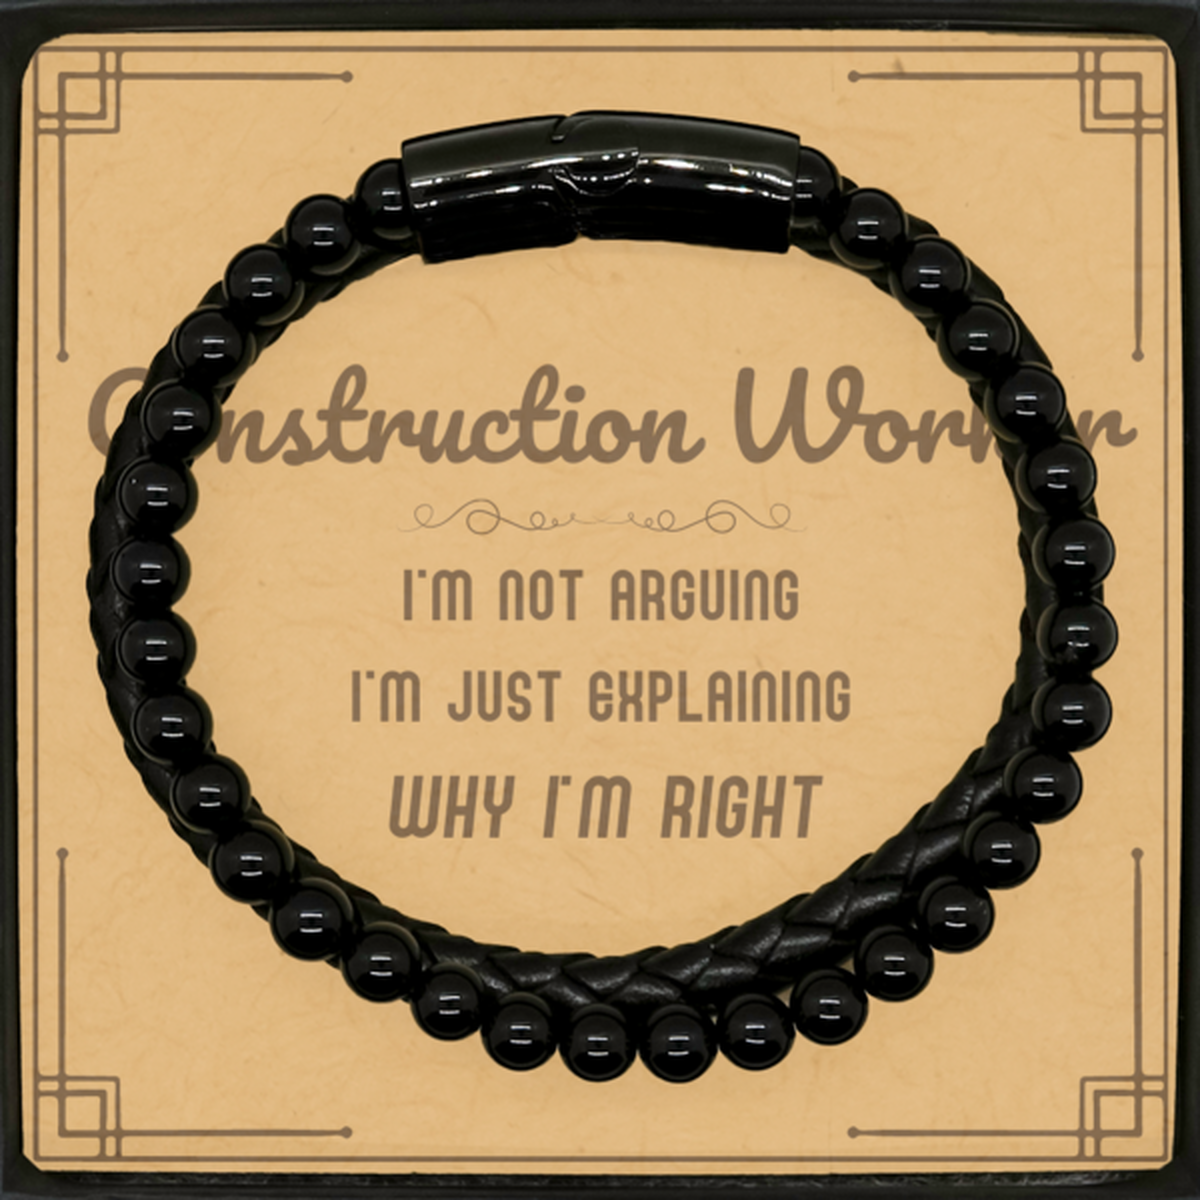 Construction Worker I'm not Arguing. I'm Just Explaining Why I'm RIGHT Stone Leather Bracelets, Funny Saying Quote Construction Worker Gifts For Construction Worker Message Card Graduation Birthday Christmas Gifts for Men Women Coworker